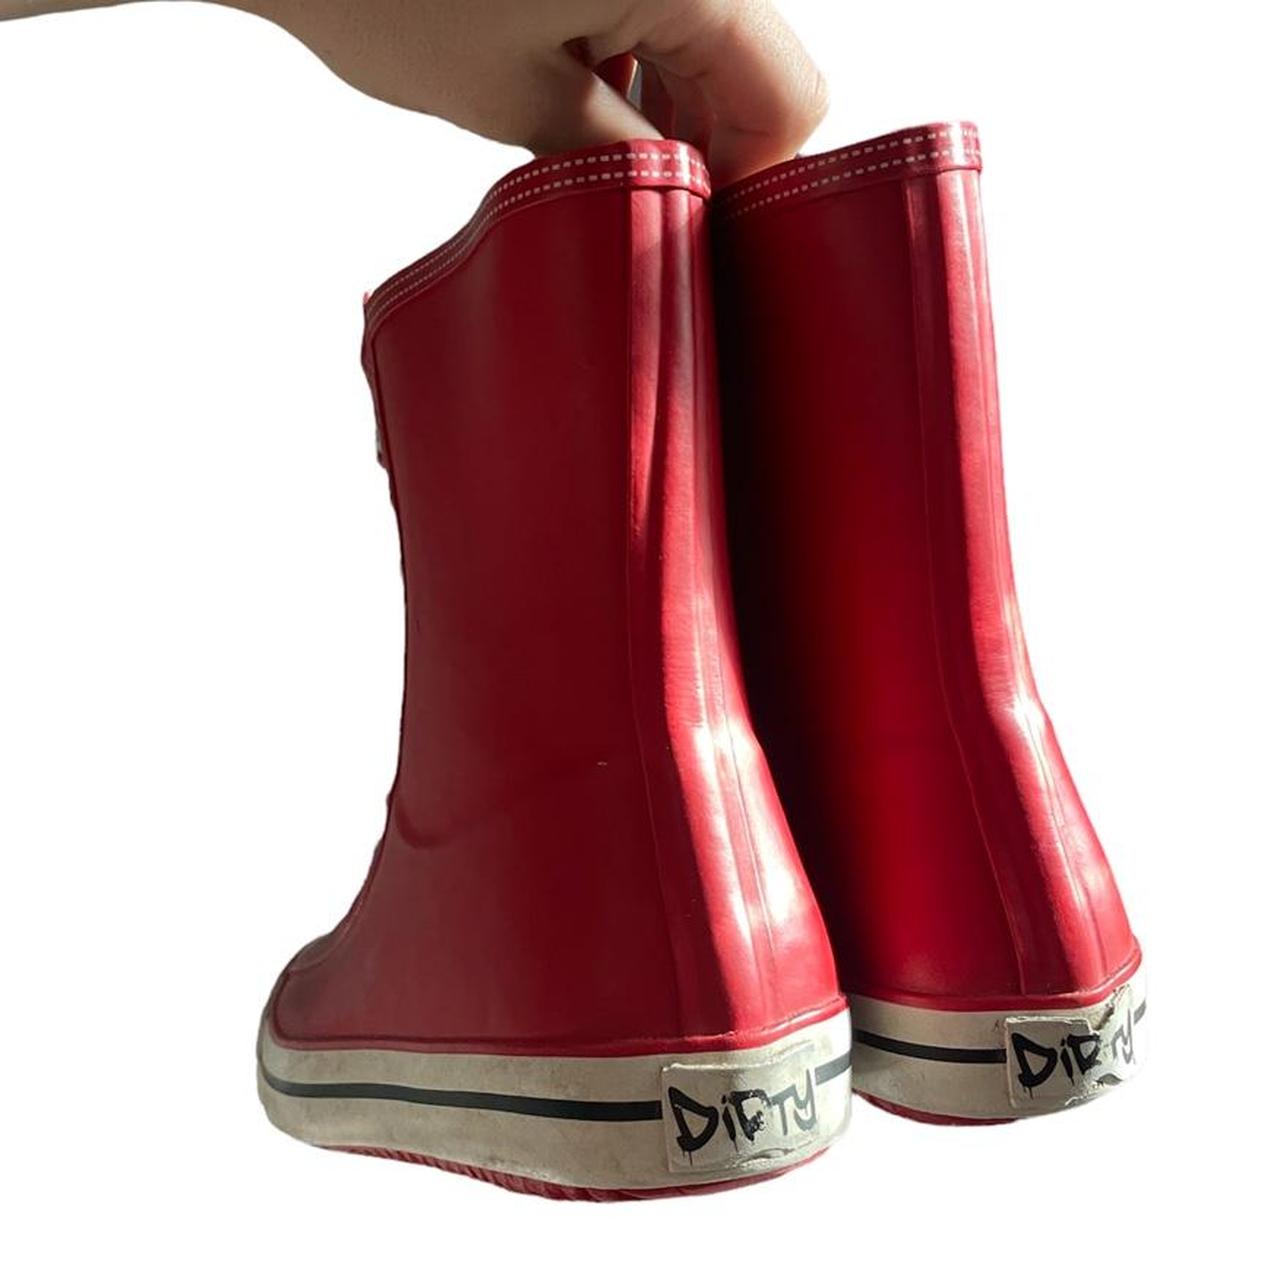 Product Image 2 - 🪢Converse-Style Rainboots🪢 Brand: Dirty Laundry,